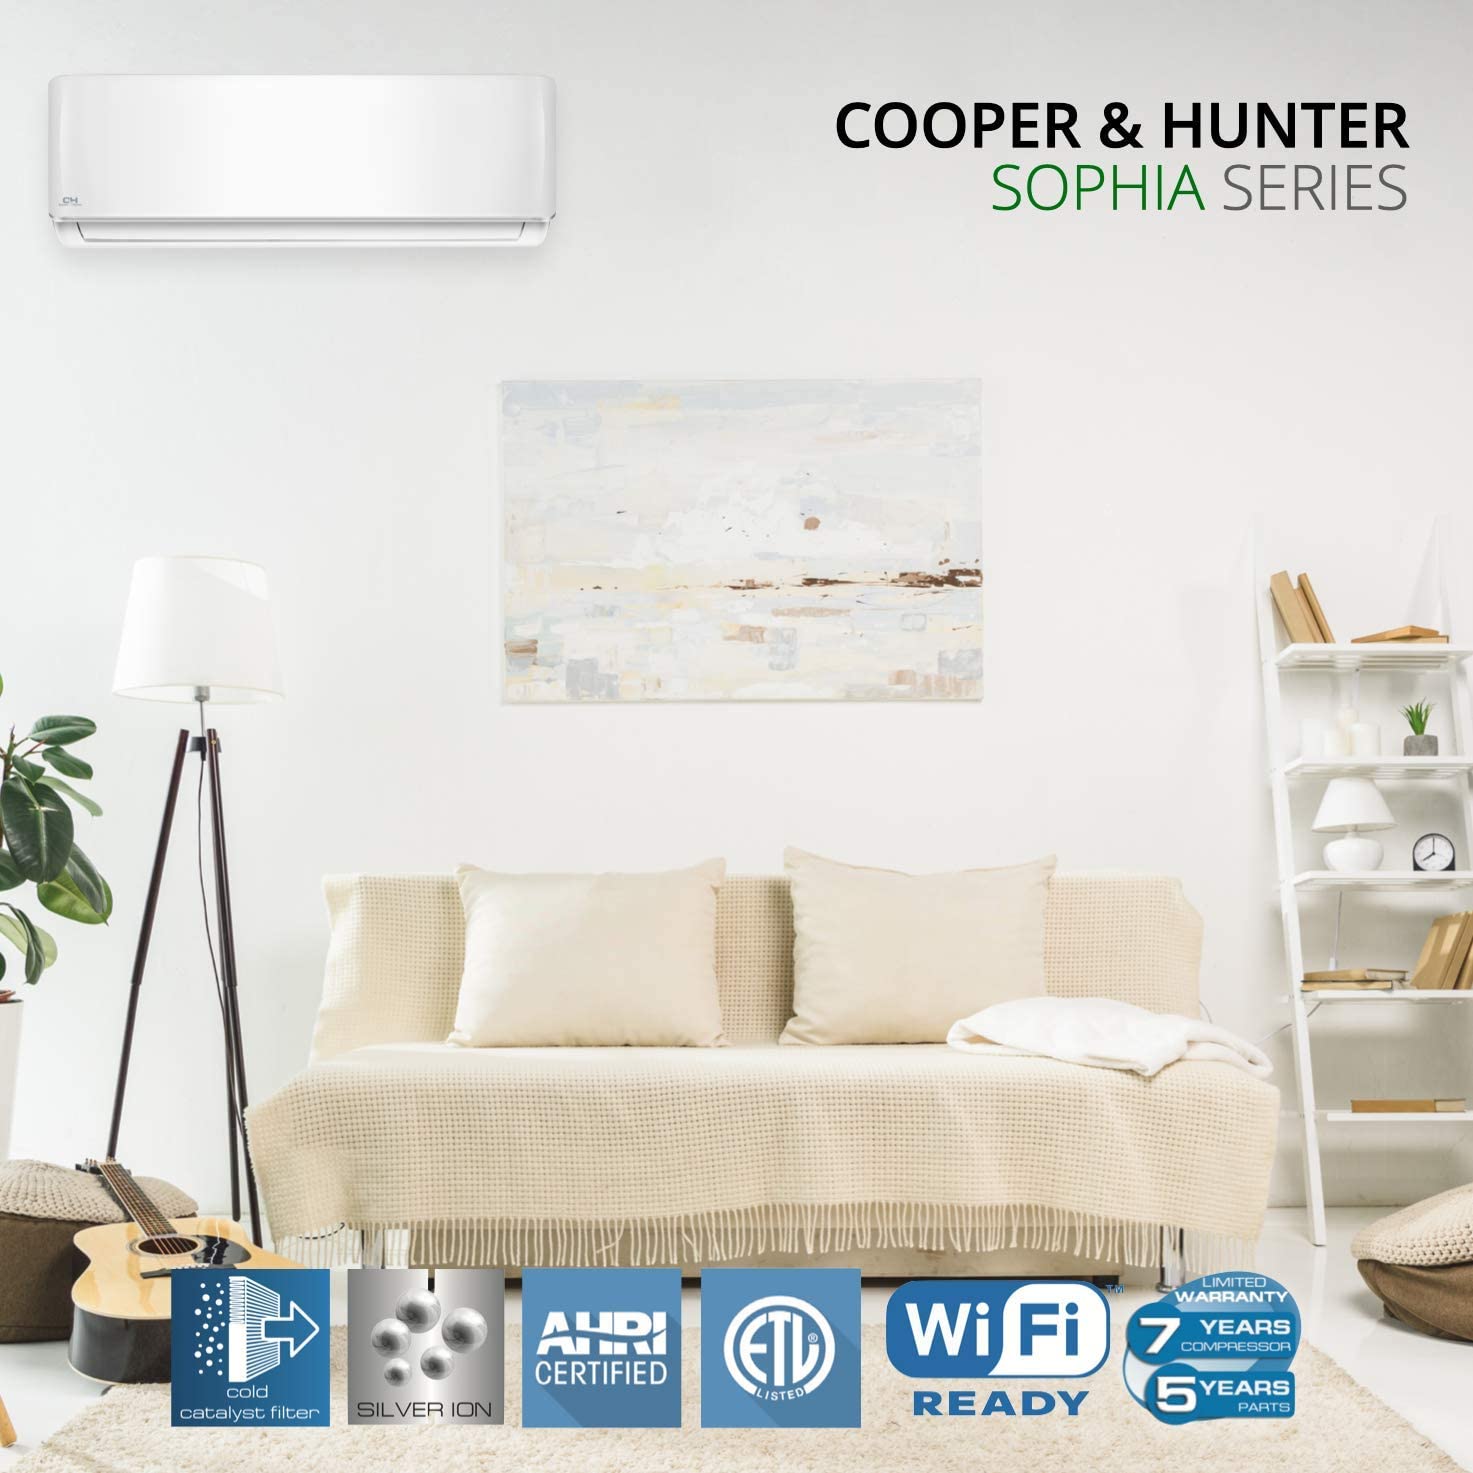 Cooper & Hunter 24000 BTU 20.5 SEER Heating and Cooling Ductless Mini Split Air Conditioner